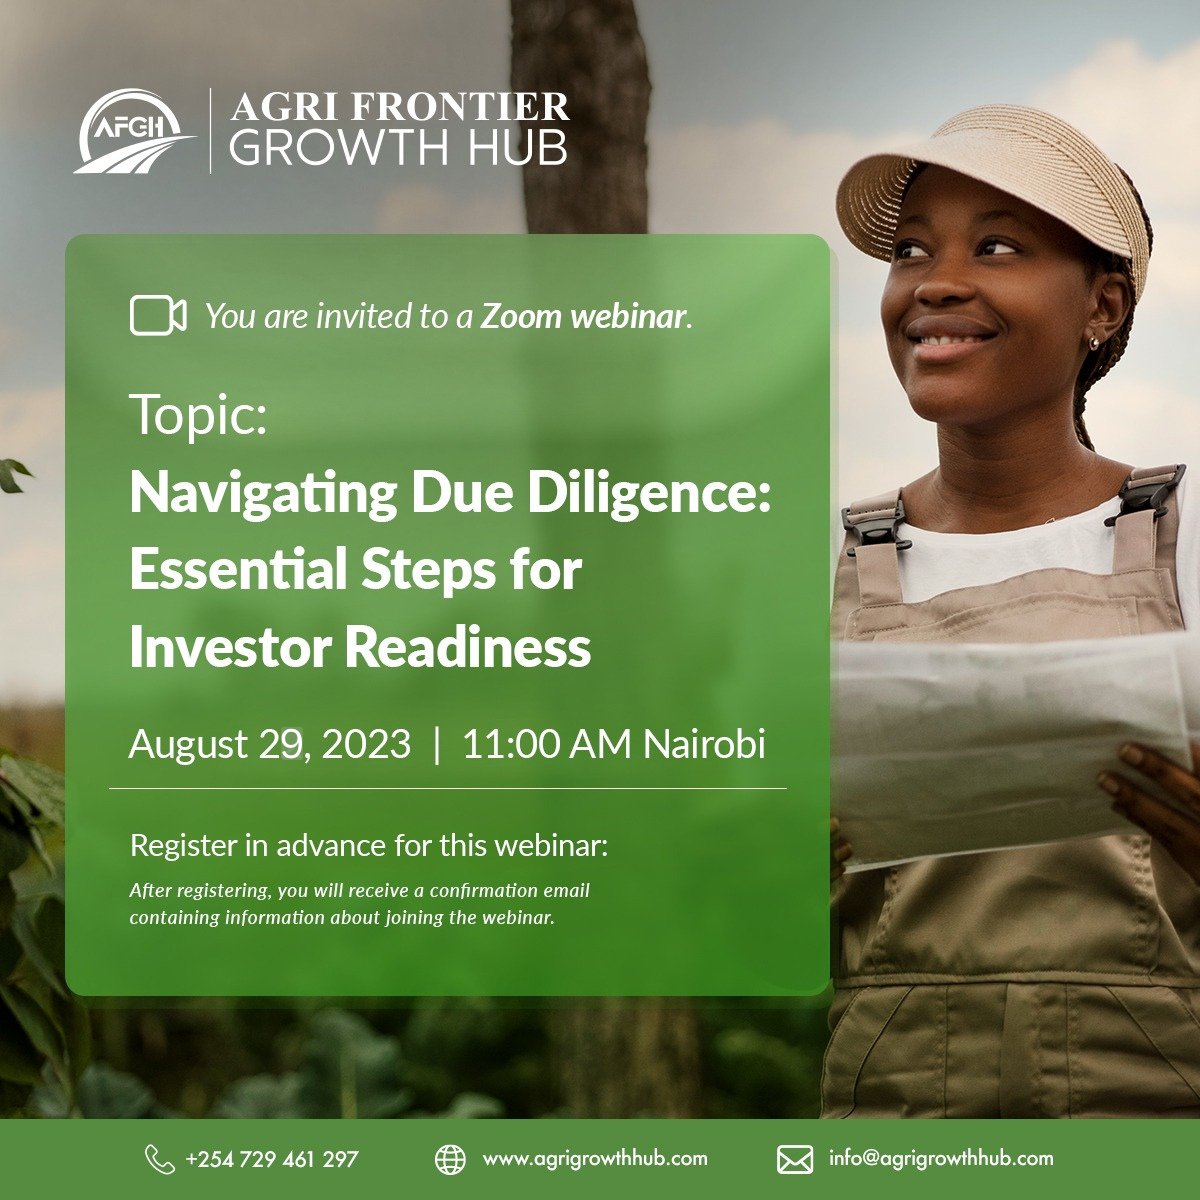 Join us on 29th August for our monthly insightful webinar. Topic: Navigating Due Diligence: Essential Steps for Investor Readiness.

Register in advance us02web.zoom.us/webinar/regist…

#agribusiness #growthhub #investorreadiness #investment #agriculture Ngong Ksh